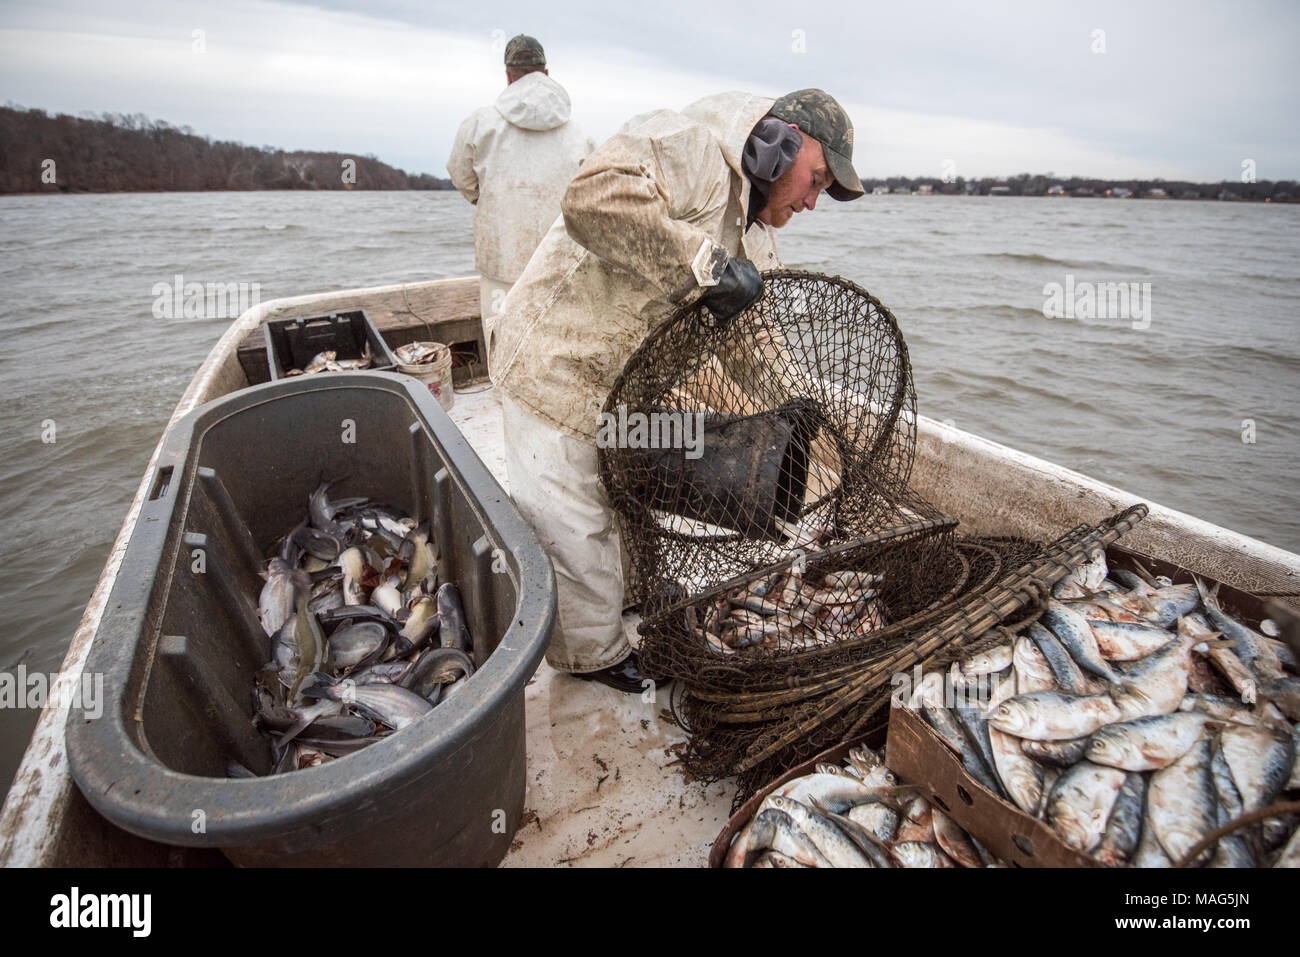 Waterman loading a hoop net with menhaden bait fish to catch blue